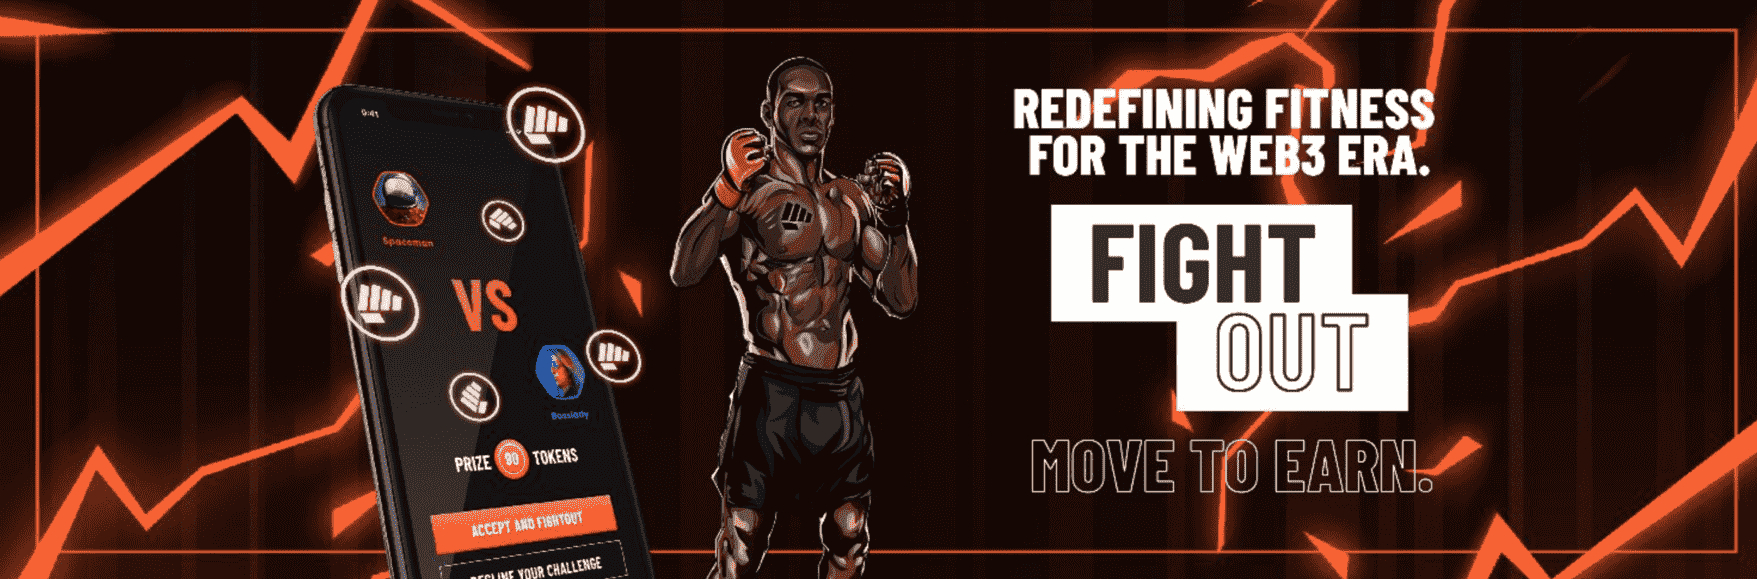 Fight Out move to earn project